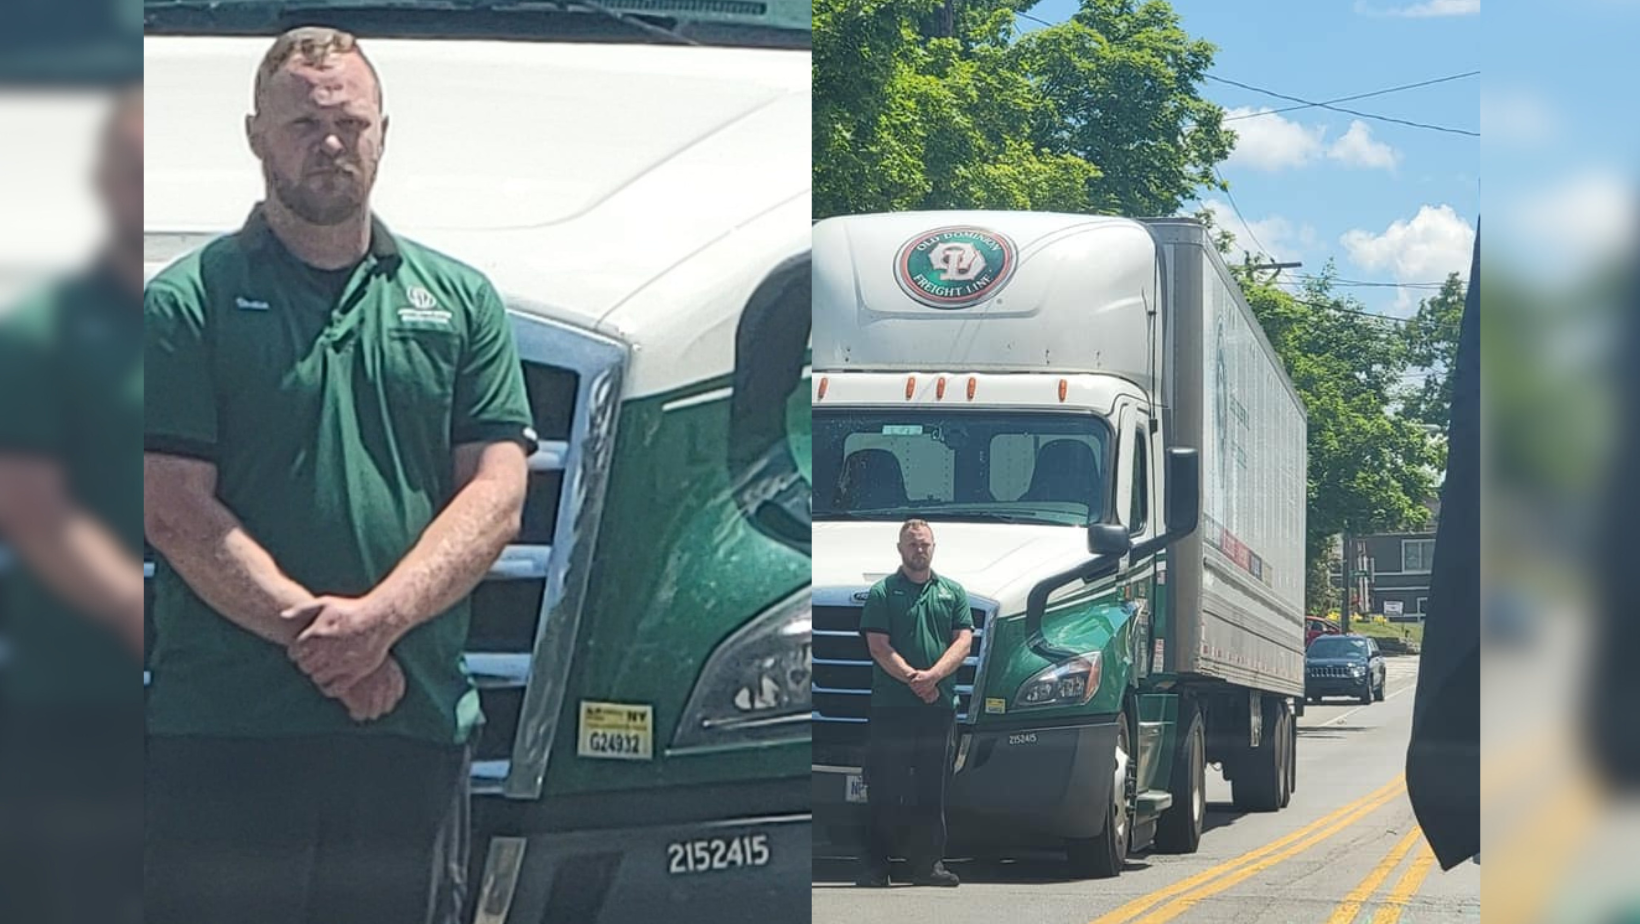 Old Dominion Freight Line employee praised for stopping during Deputy